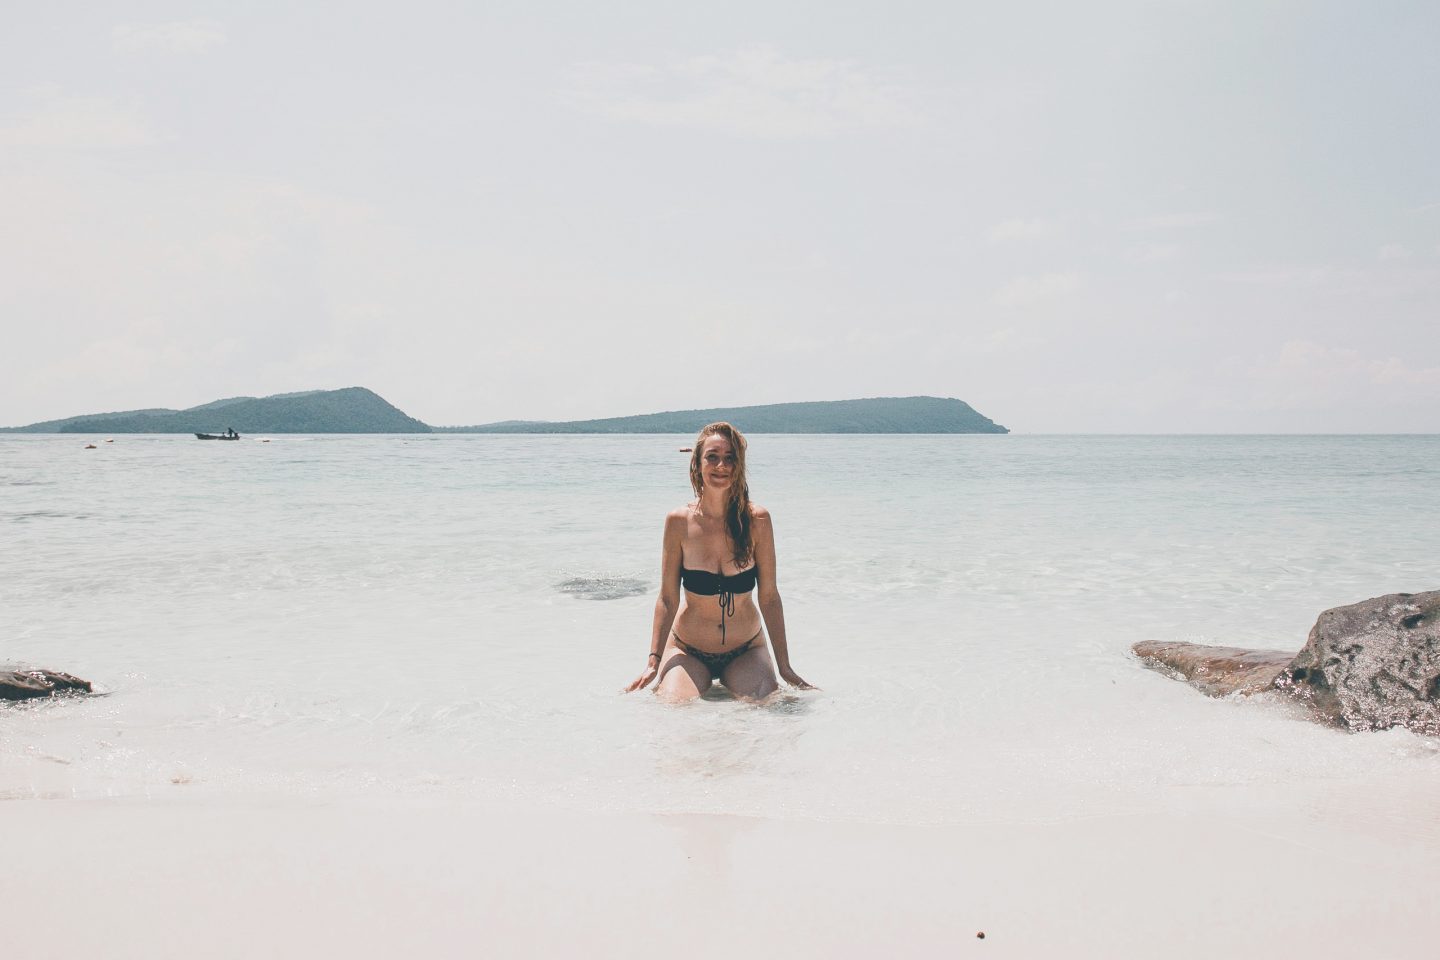 Island Life in Koh Rong, Cambodia